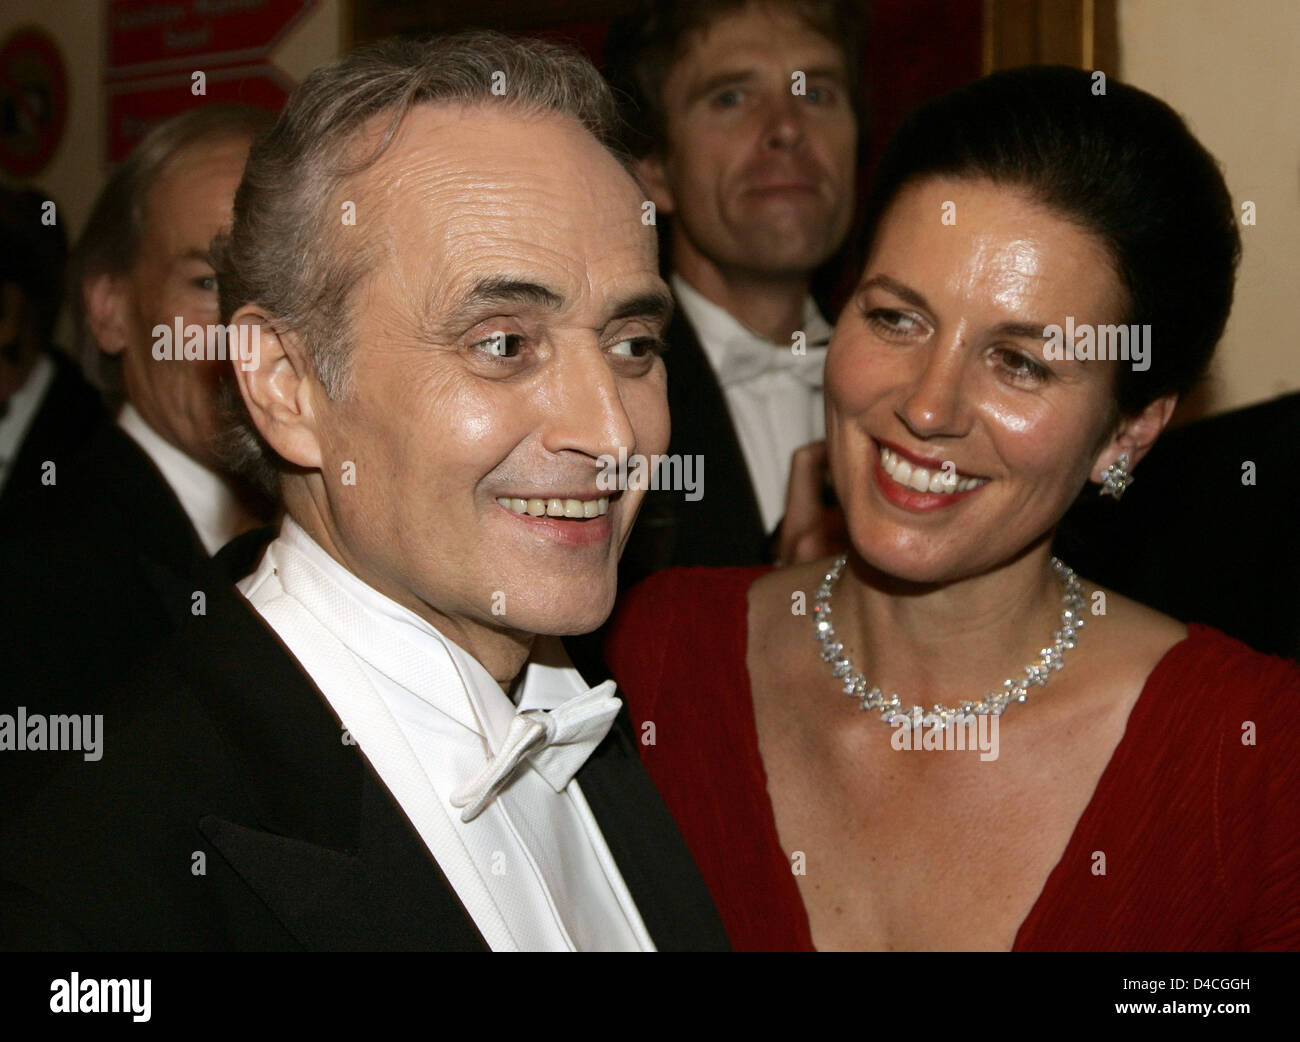 Spanish tenor Jose Carreras and his wife Jutta Jaeger depicted at the  Chopard-Loge during the 52nd Vienna Opera Ball in Vienna, Austria, 31  January 2008. Photo: Arno Burgi Stock Photo - Alamy